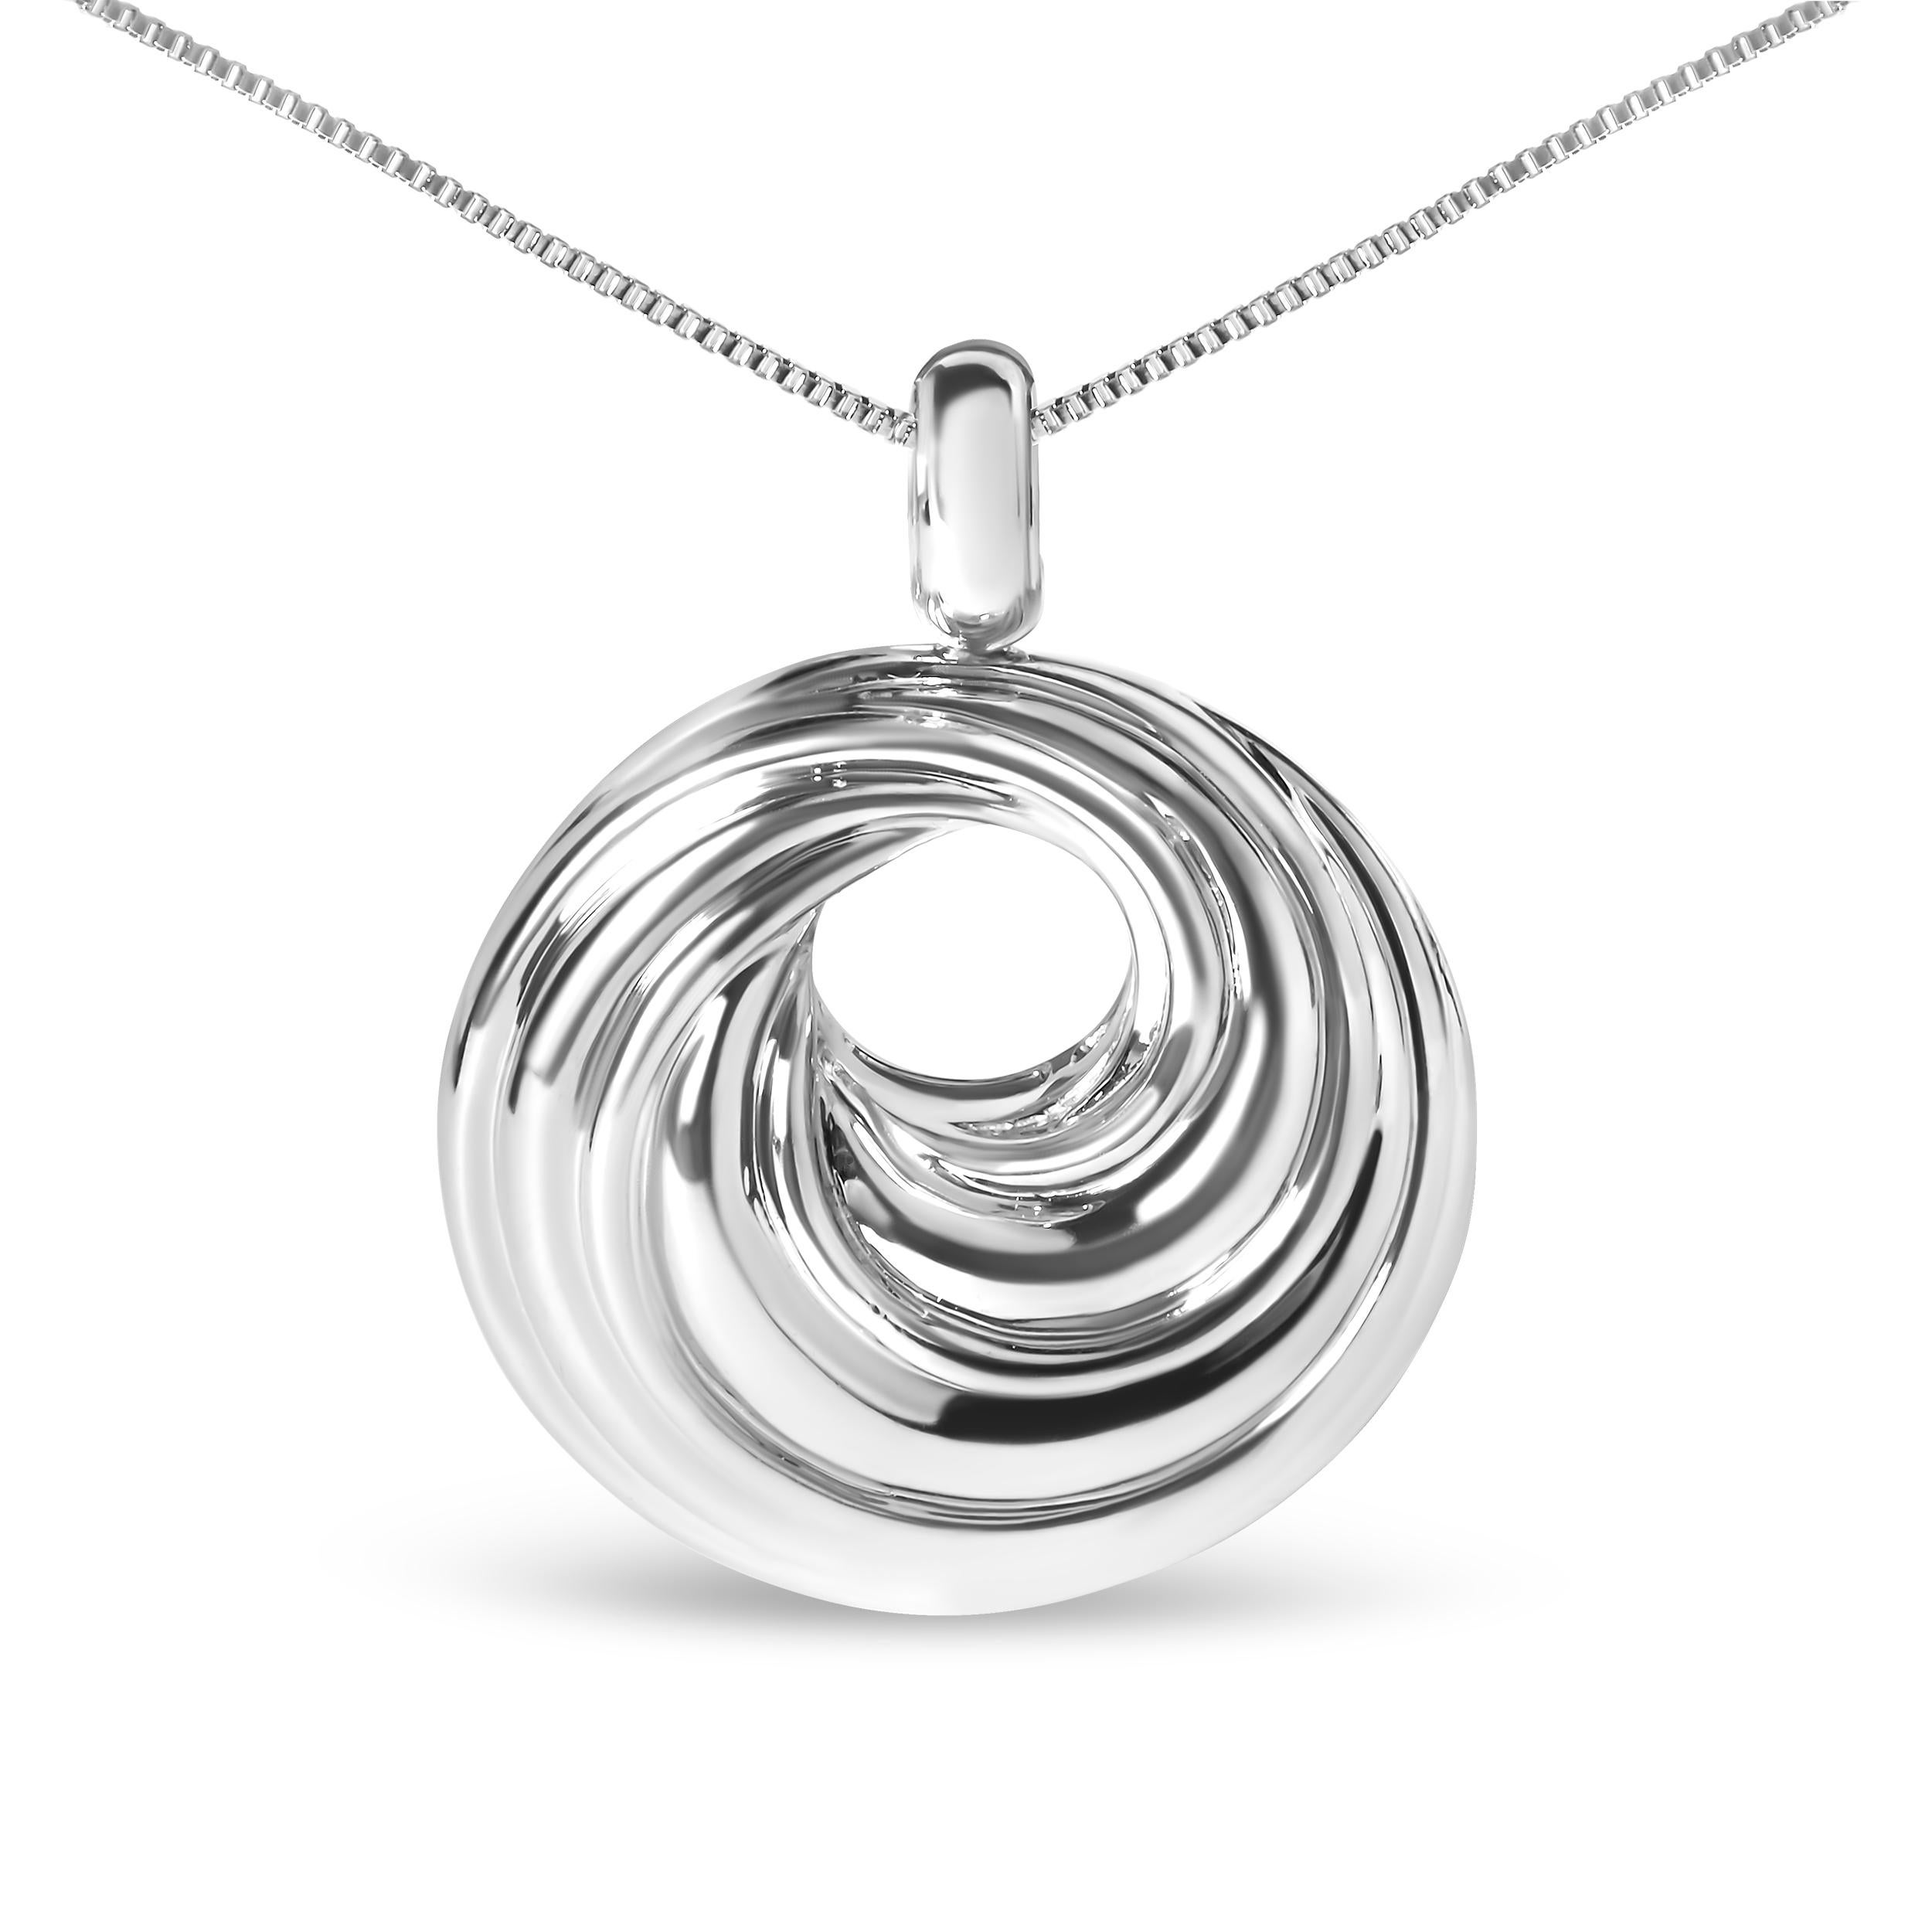 Introducing a stunning statement piece that will make you feel like you're riding the waves of life. This .925 Sterling Silver Endless Wave Swirl Statement Medallion 18